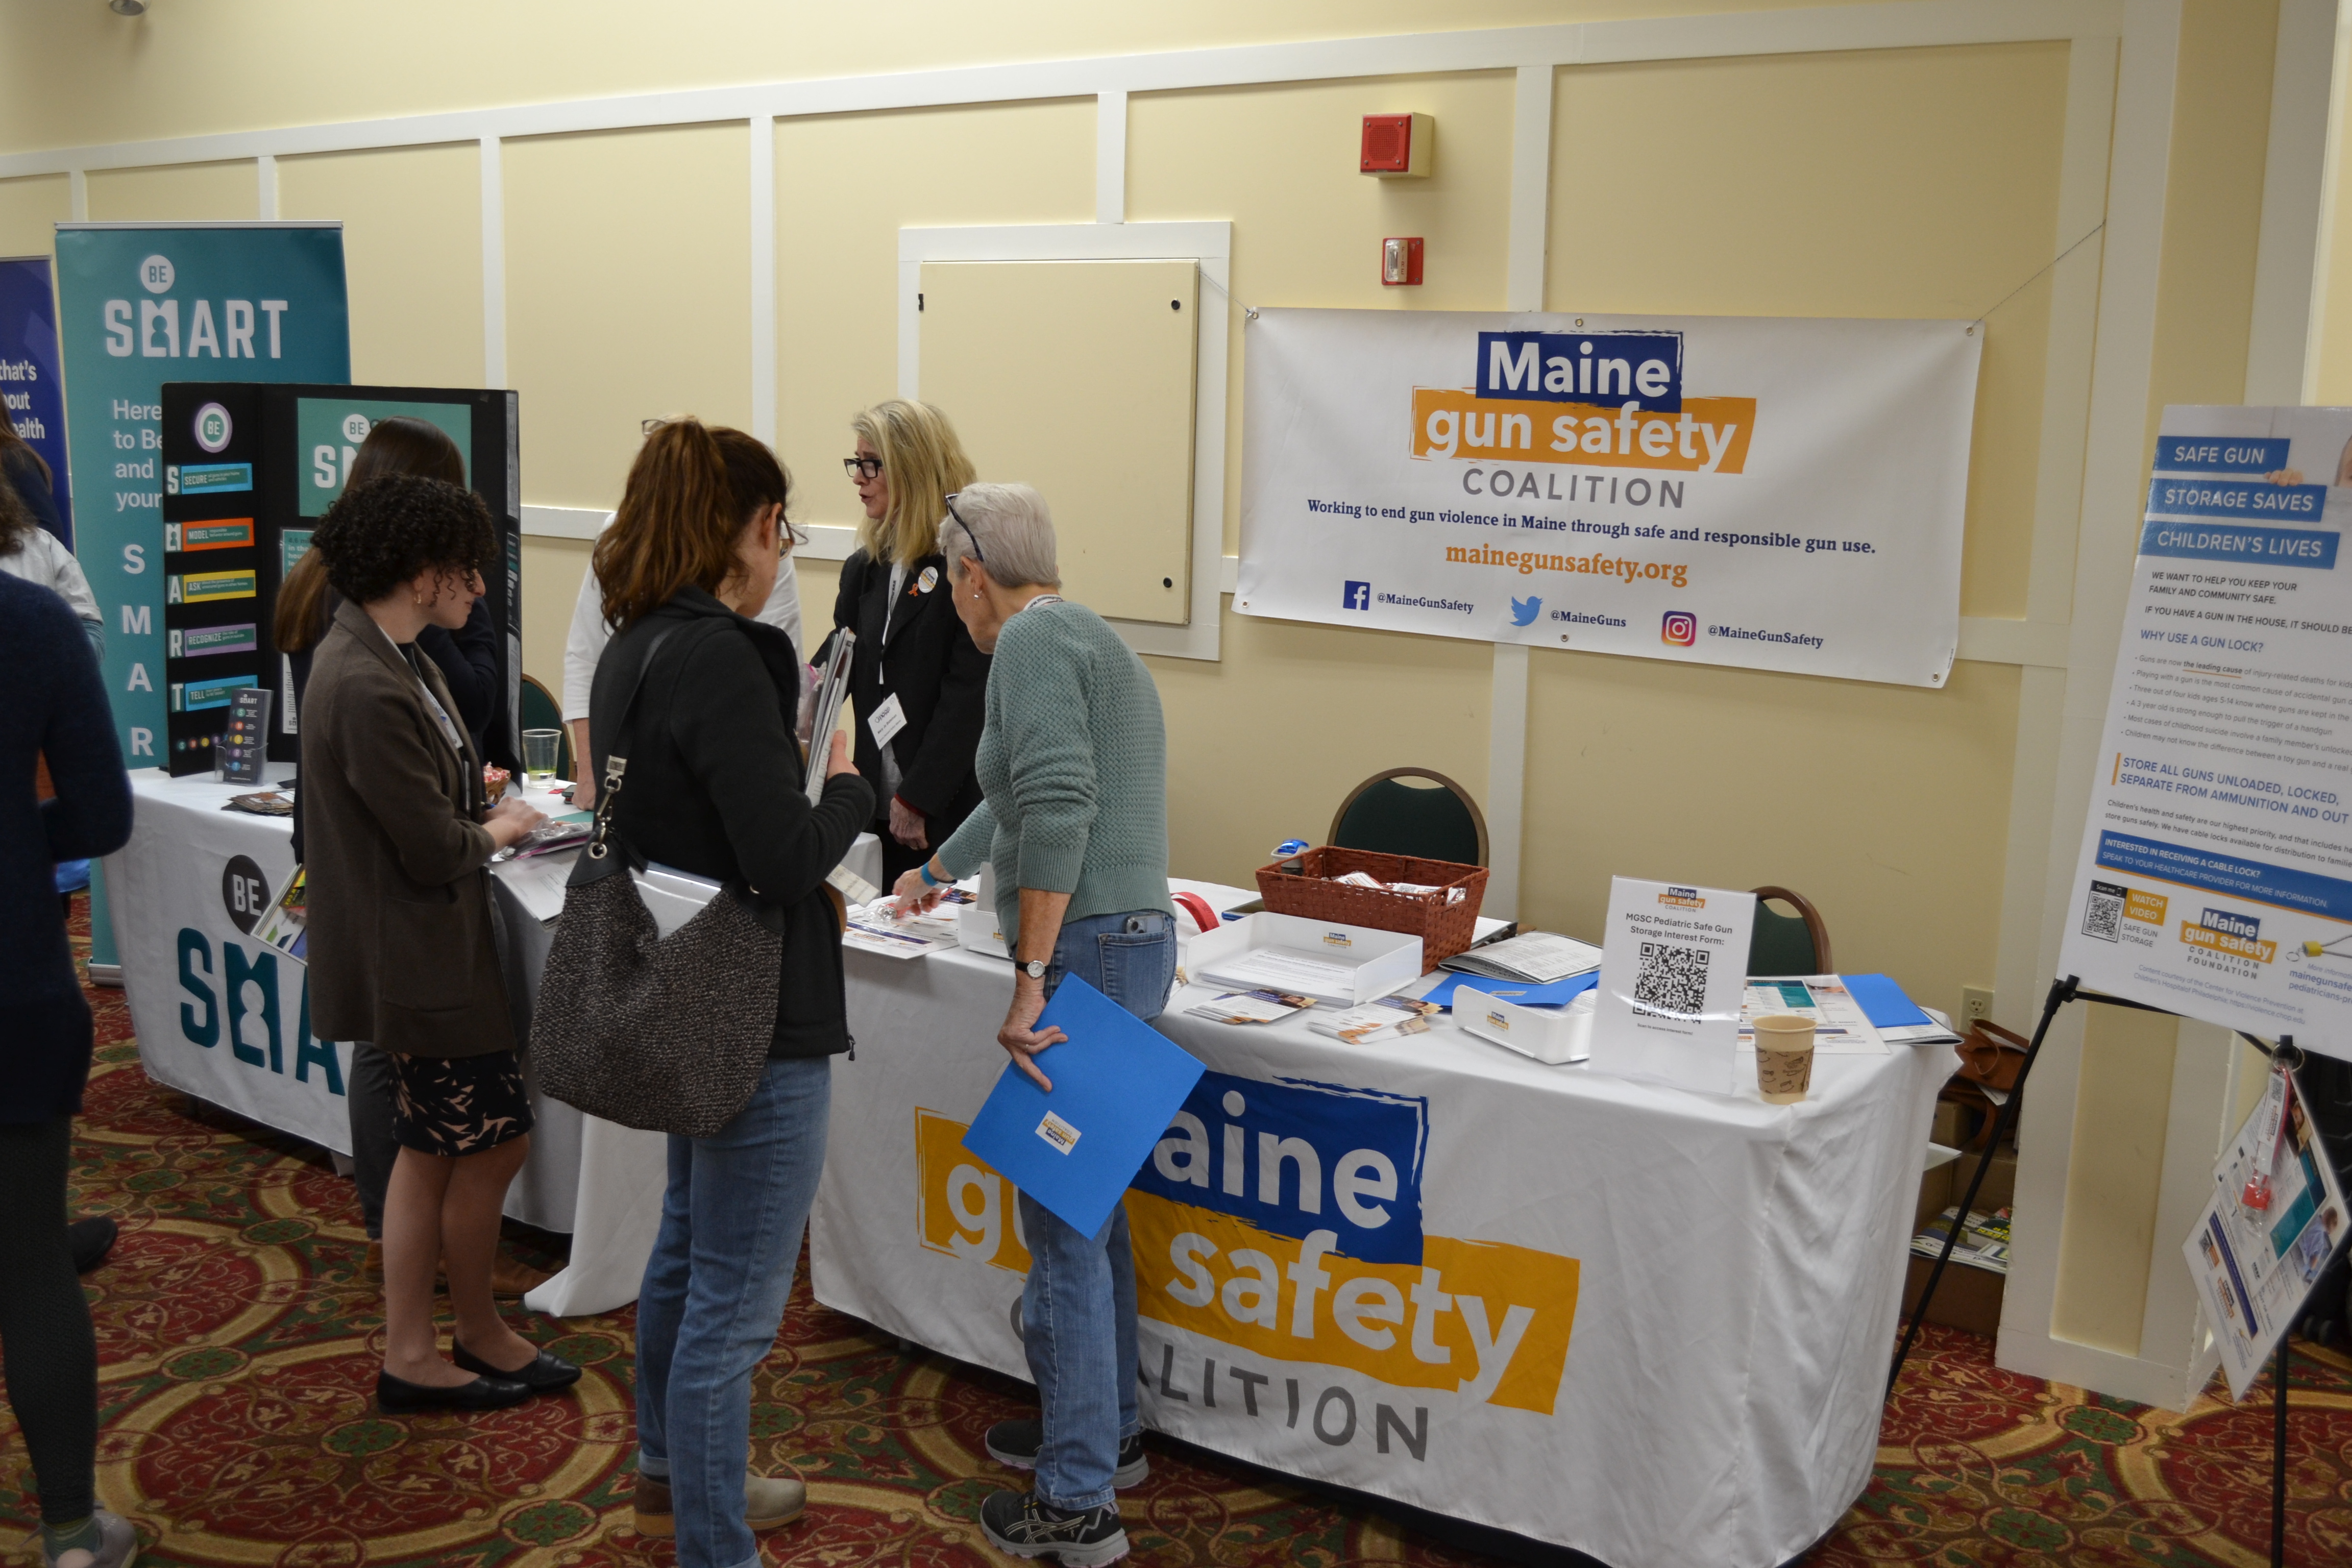 Maine Gun Safety Coalition and Be Smart Exhibits